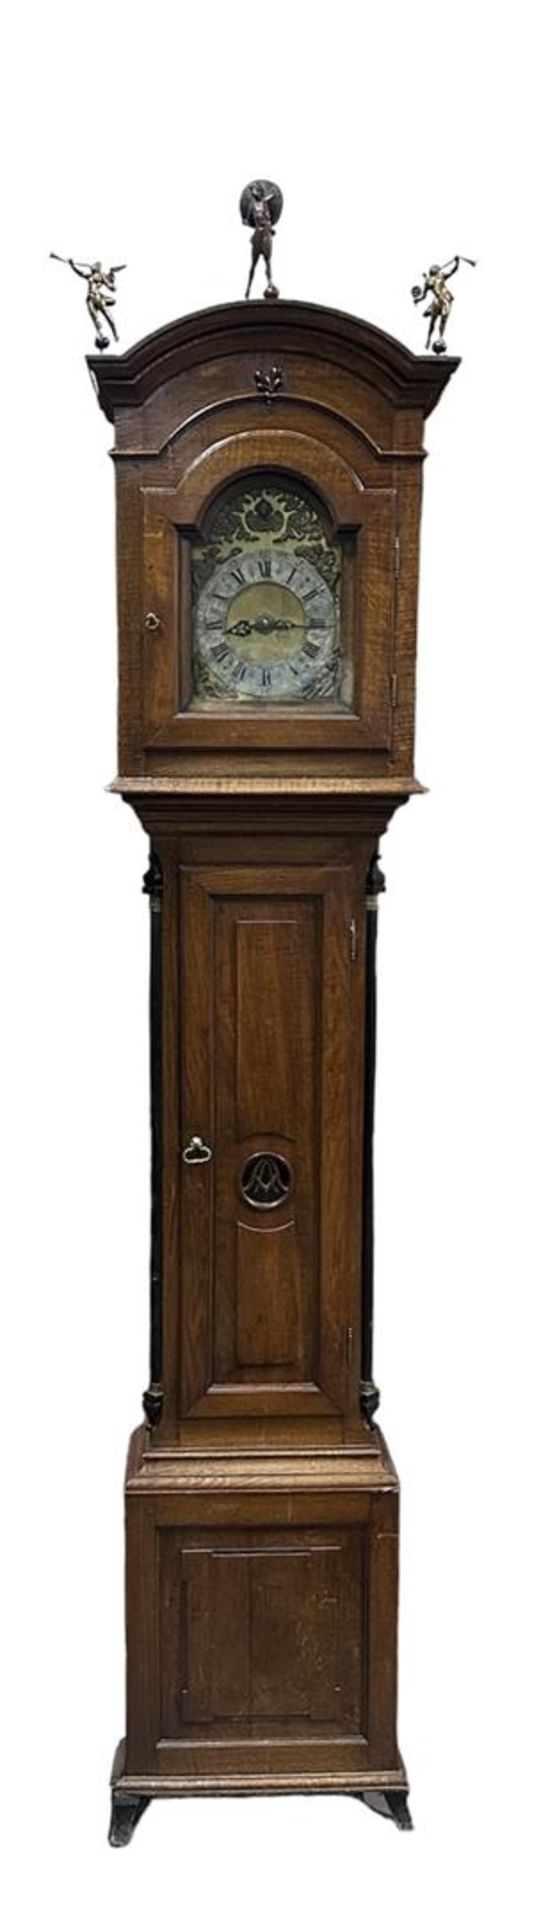 A grandfather clock with atlas and fama images. Simple timepiece.
H.: 278 cm.